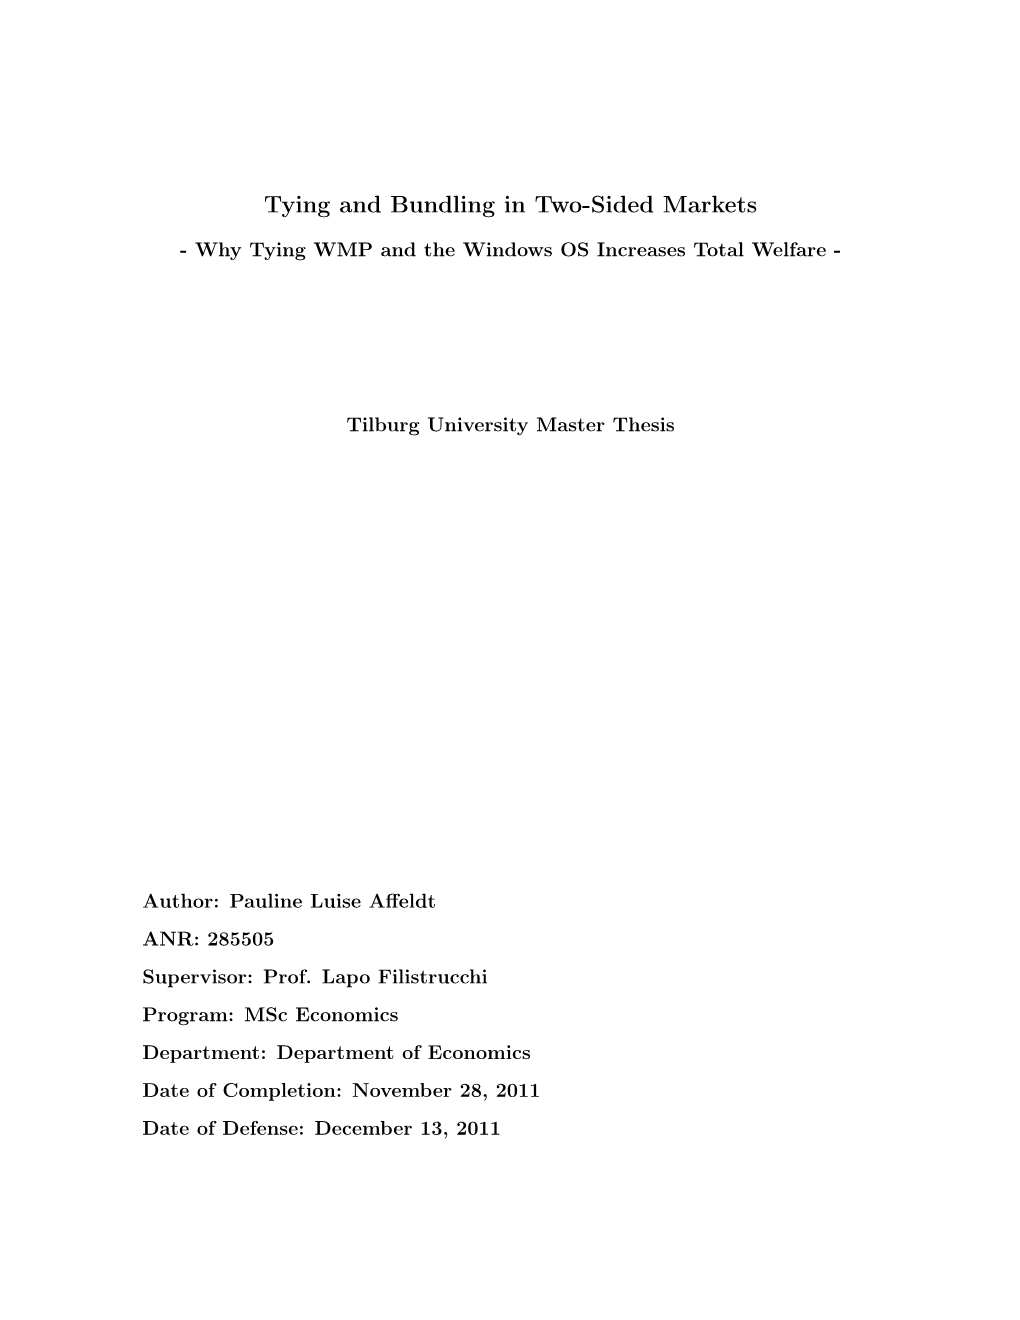 Tying and Bundling in Two-Sided Markets